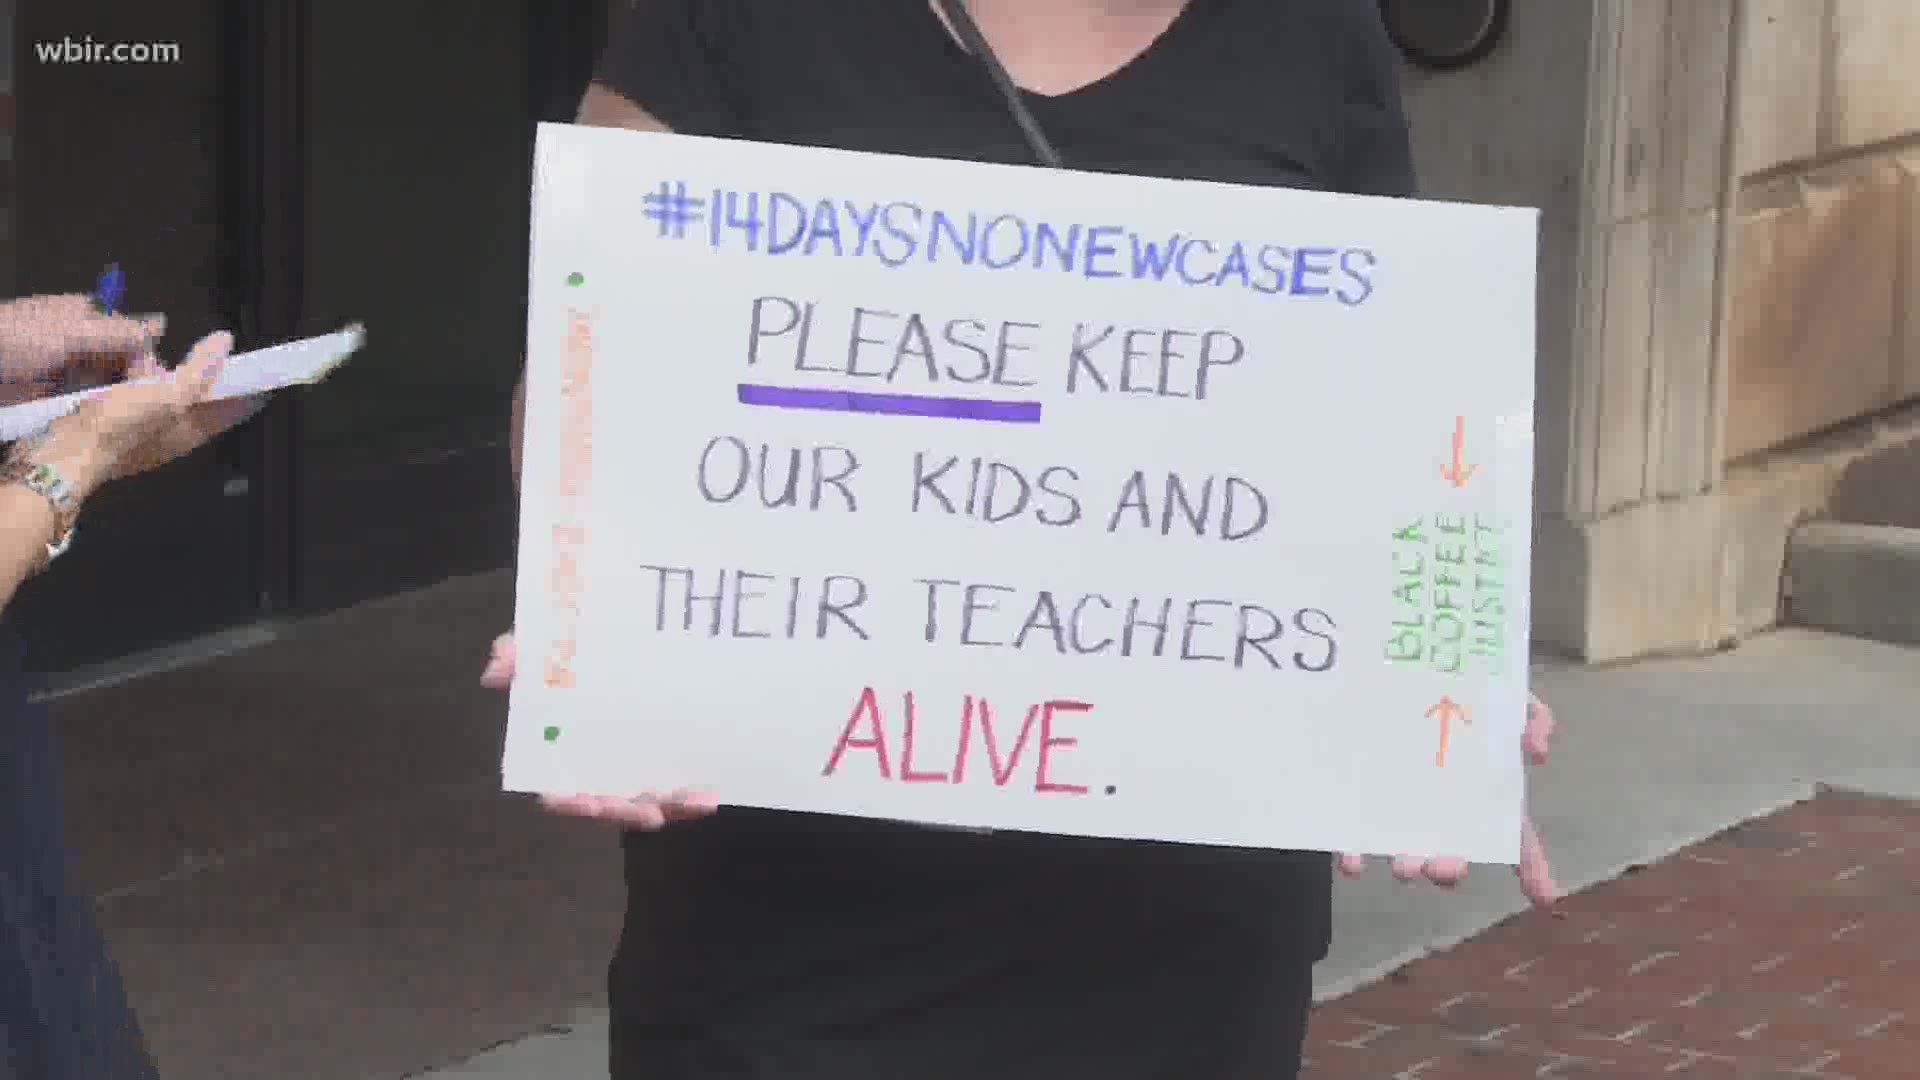 The group wants schools kept online until there are no new cases COVID-19 cases for 14 consecutive days.